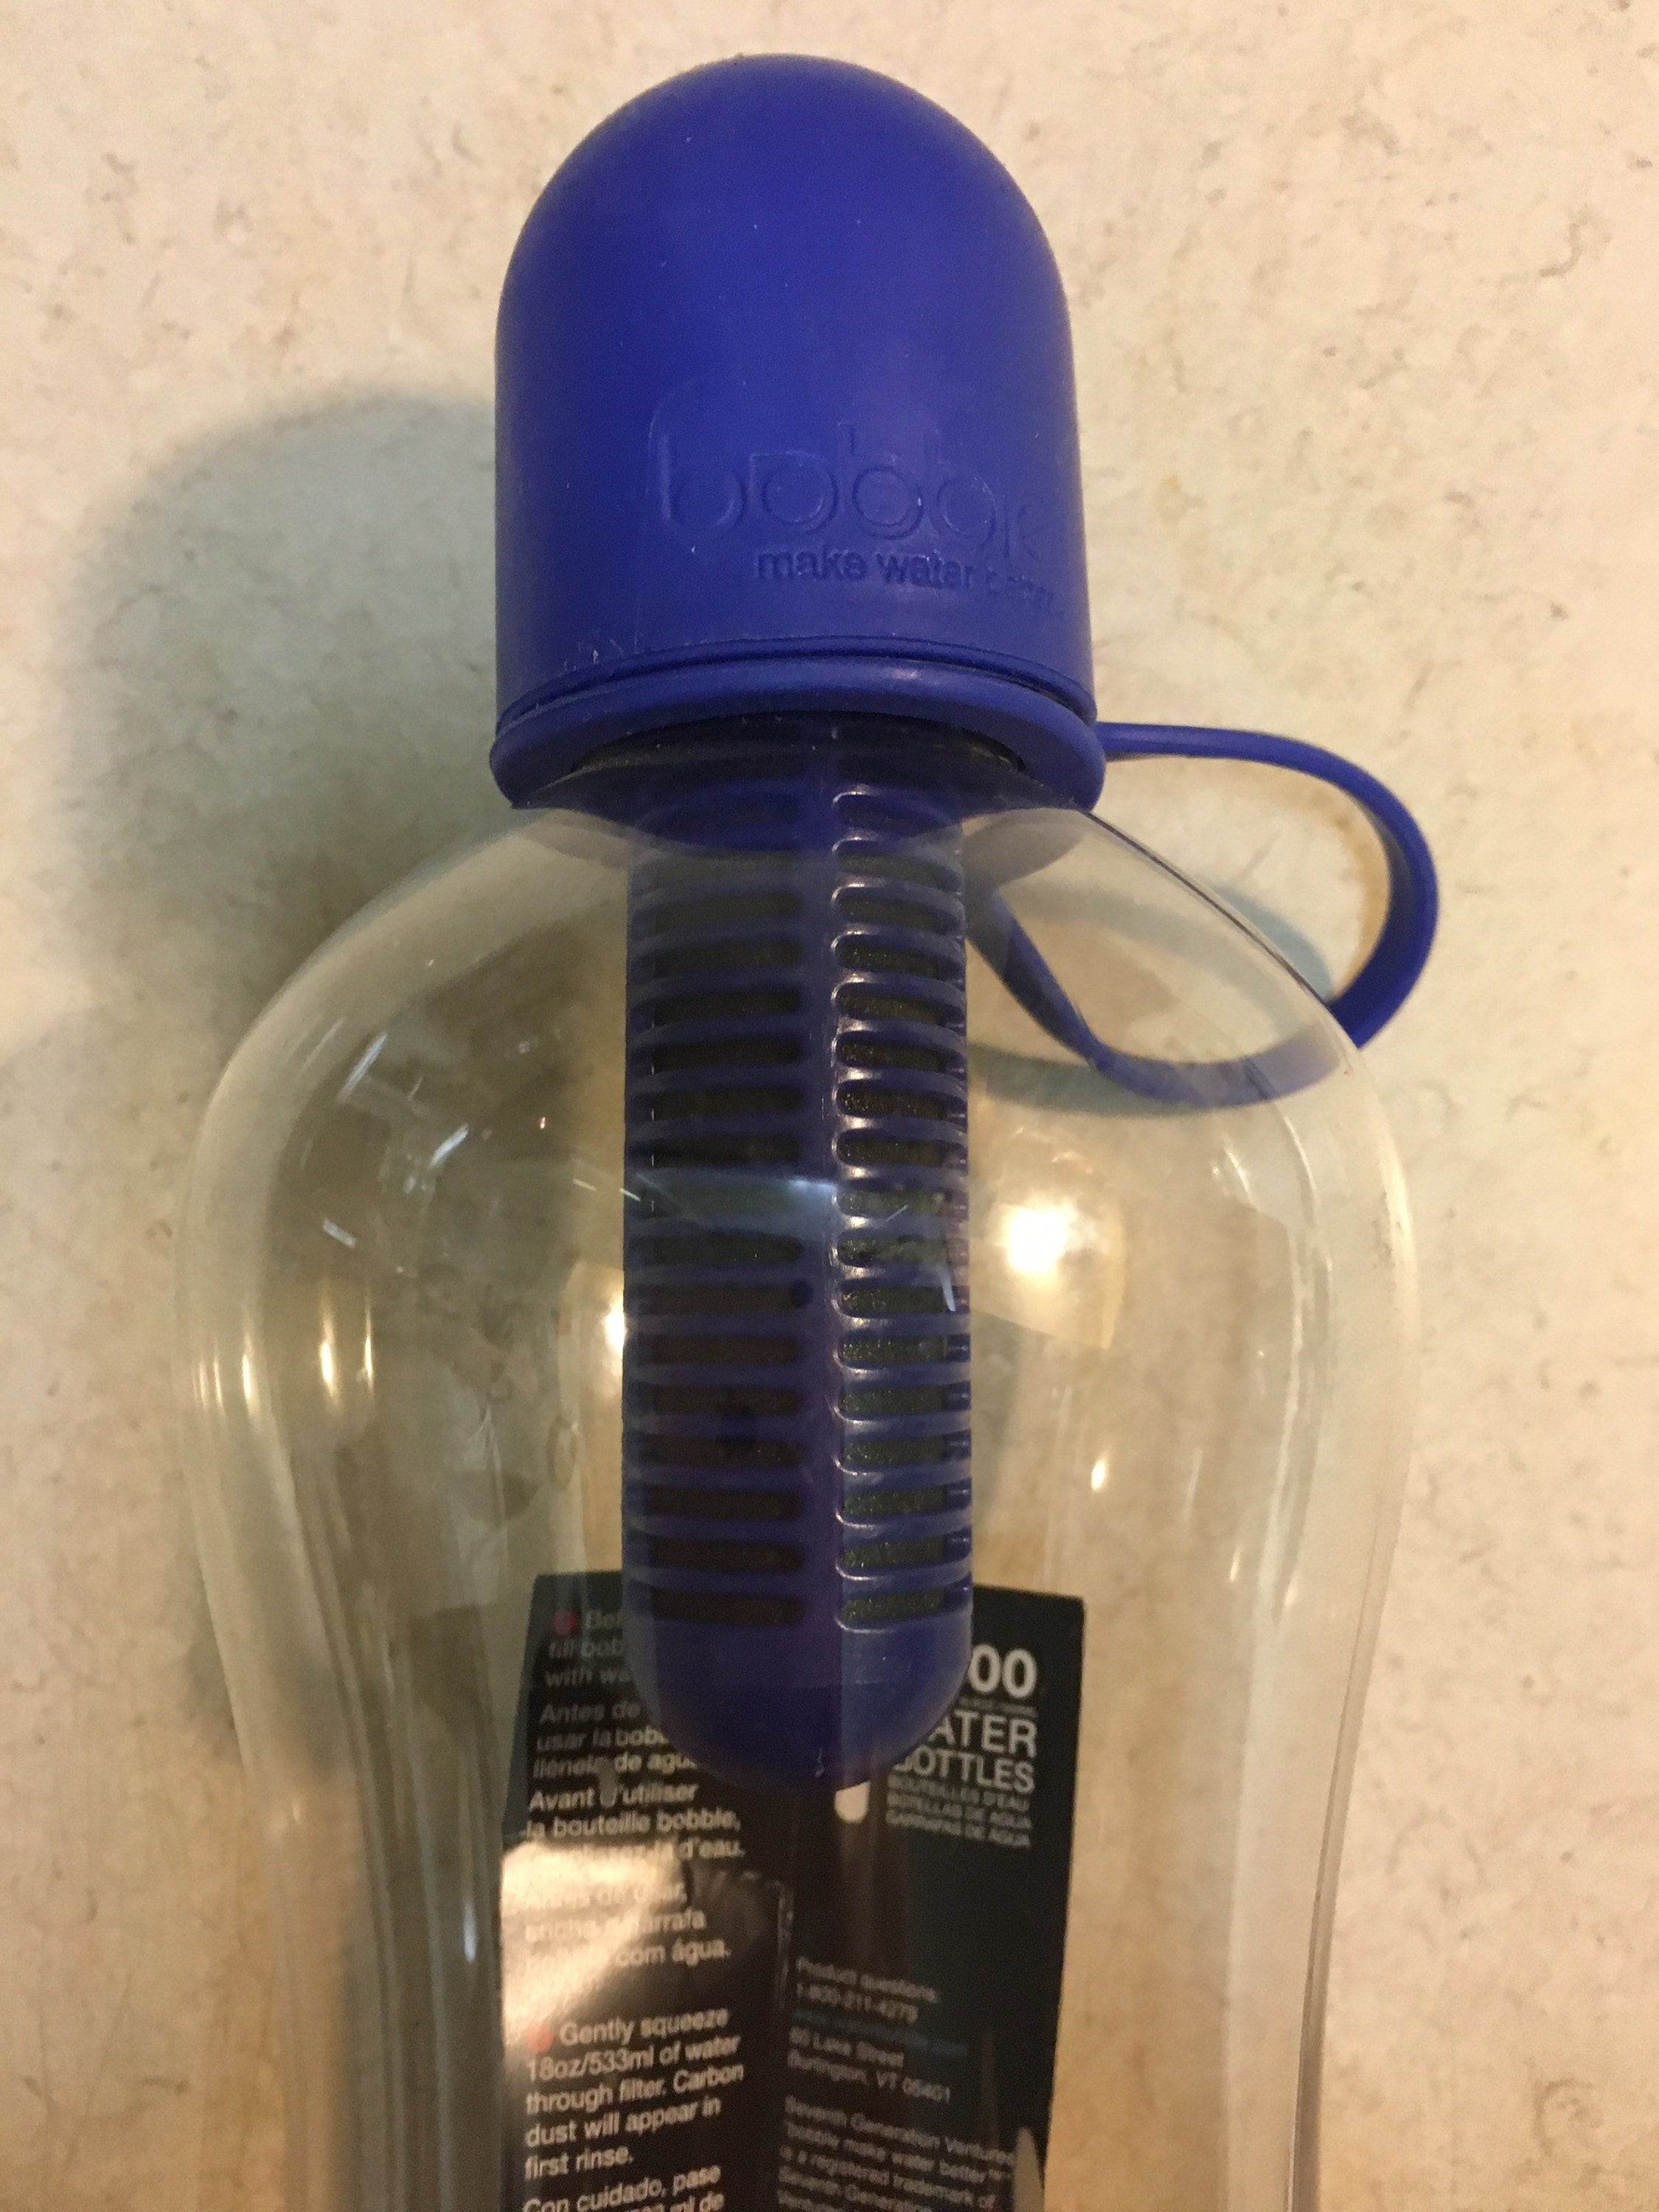 Bobble Classic Water Bottle, Filtered Water, BPA-Free Reusable Bottle, Soft  Touch Carry Cap with Rep…See more Bobble Classic Water Bottle, Filtered